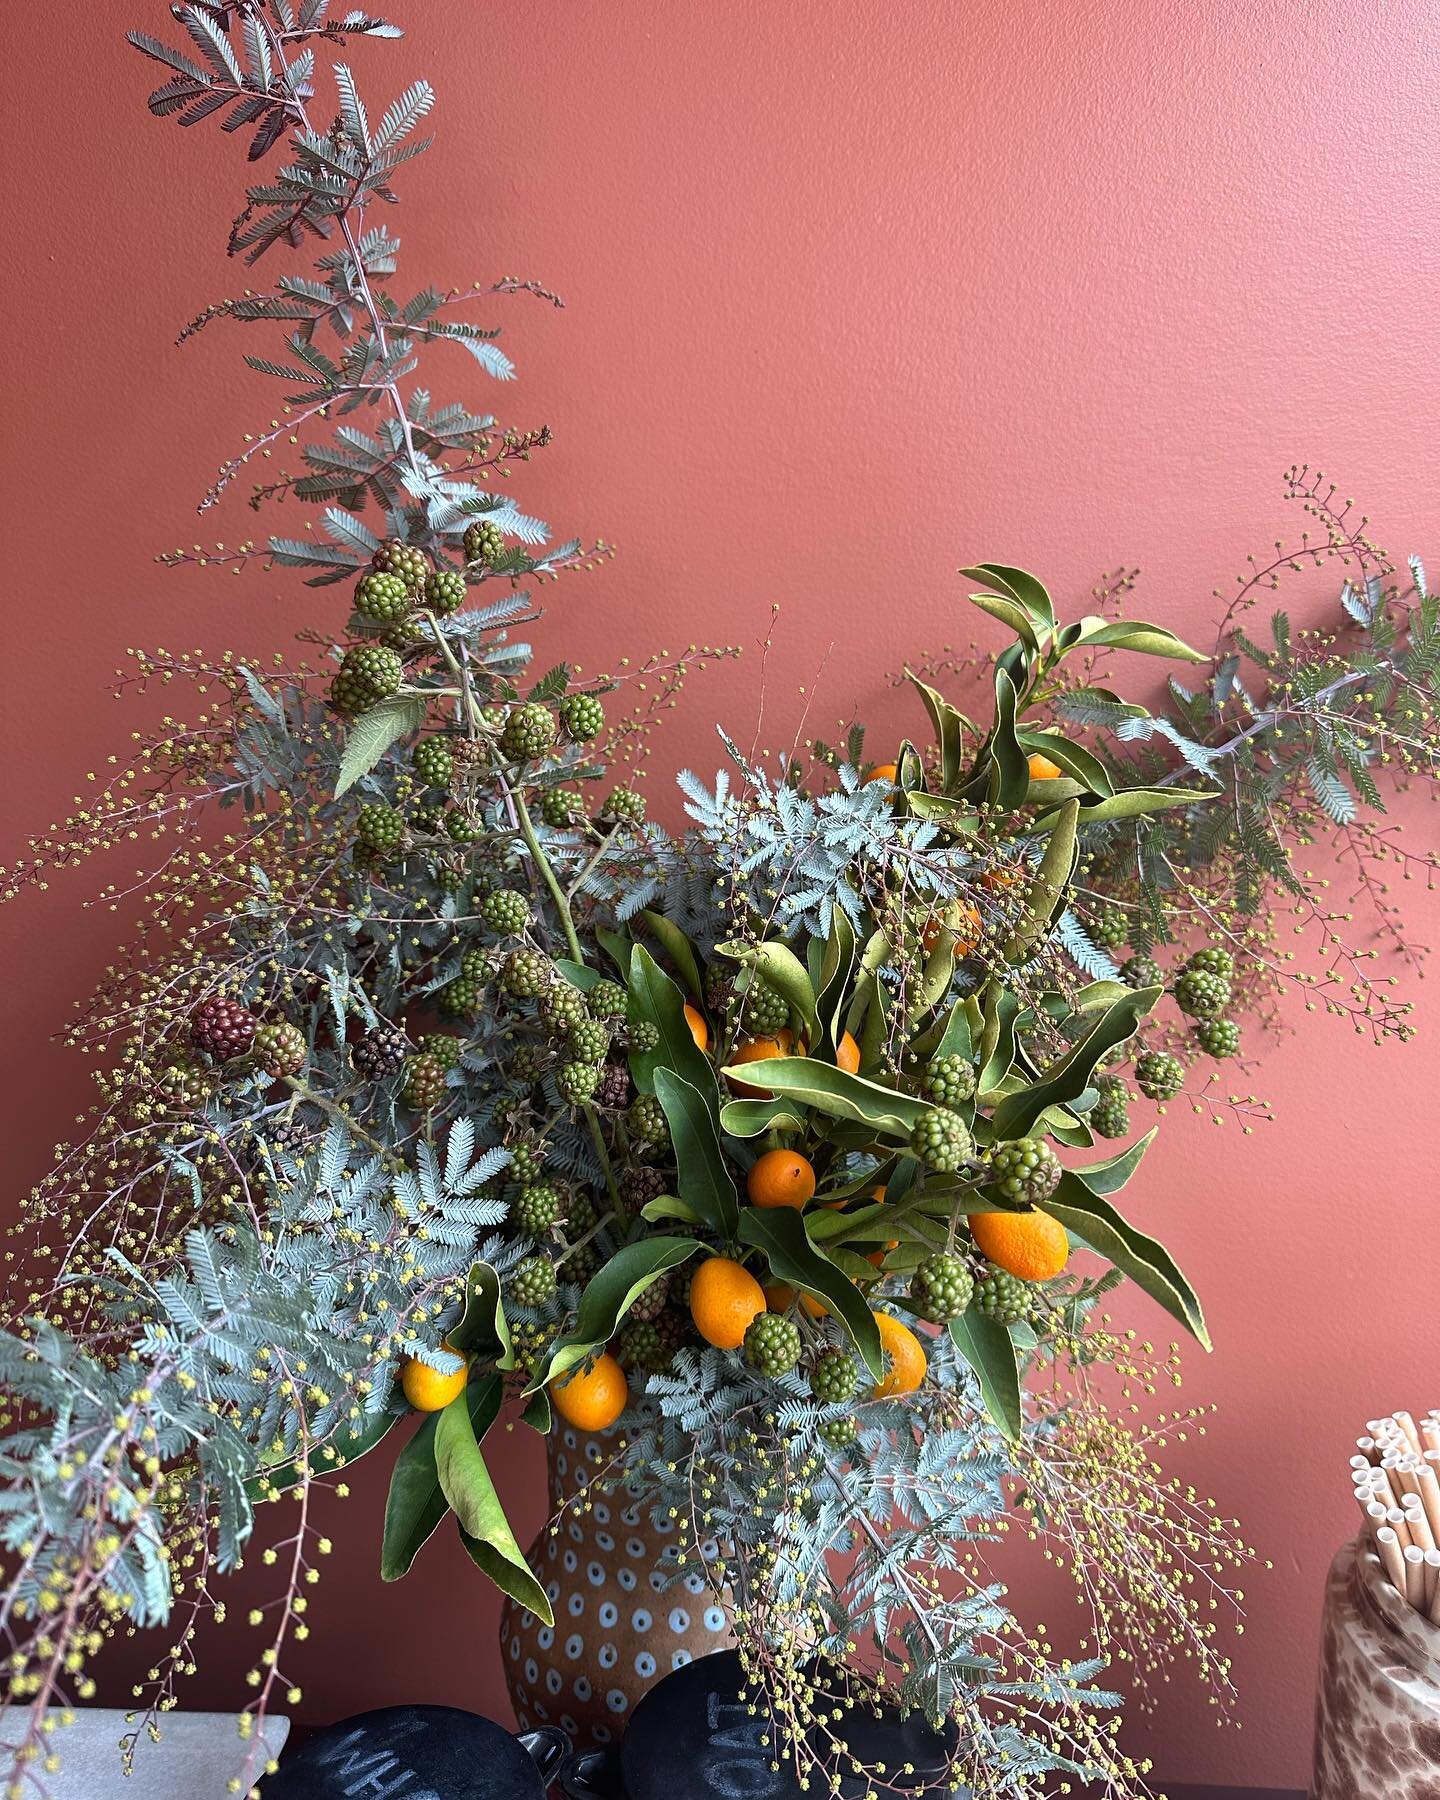 Completely inspired and in awe of this edible bouquet made of kumquats and unripened blackberries. #foodasart